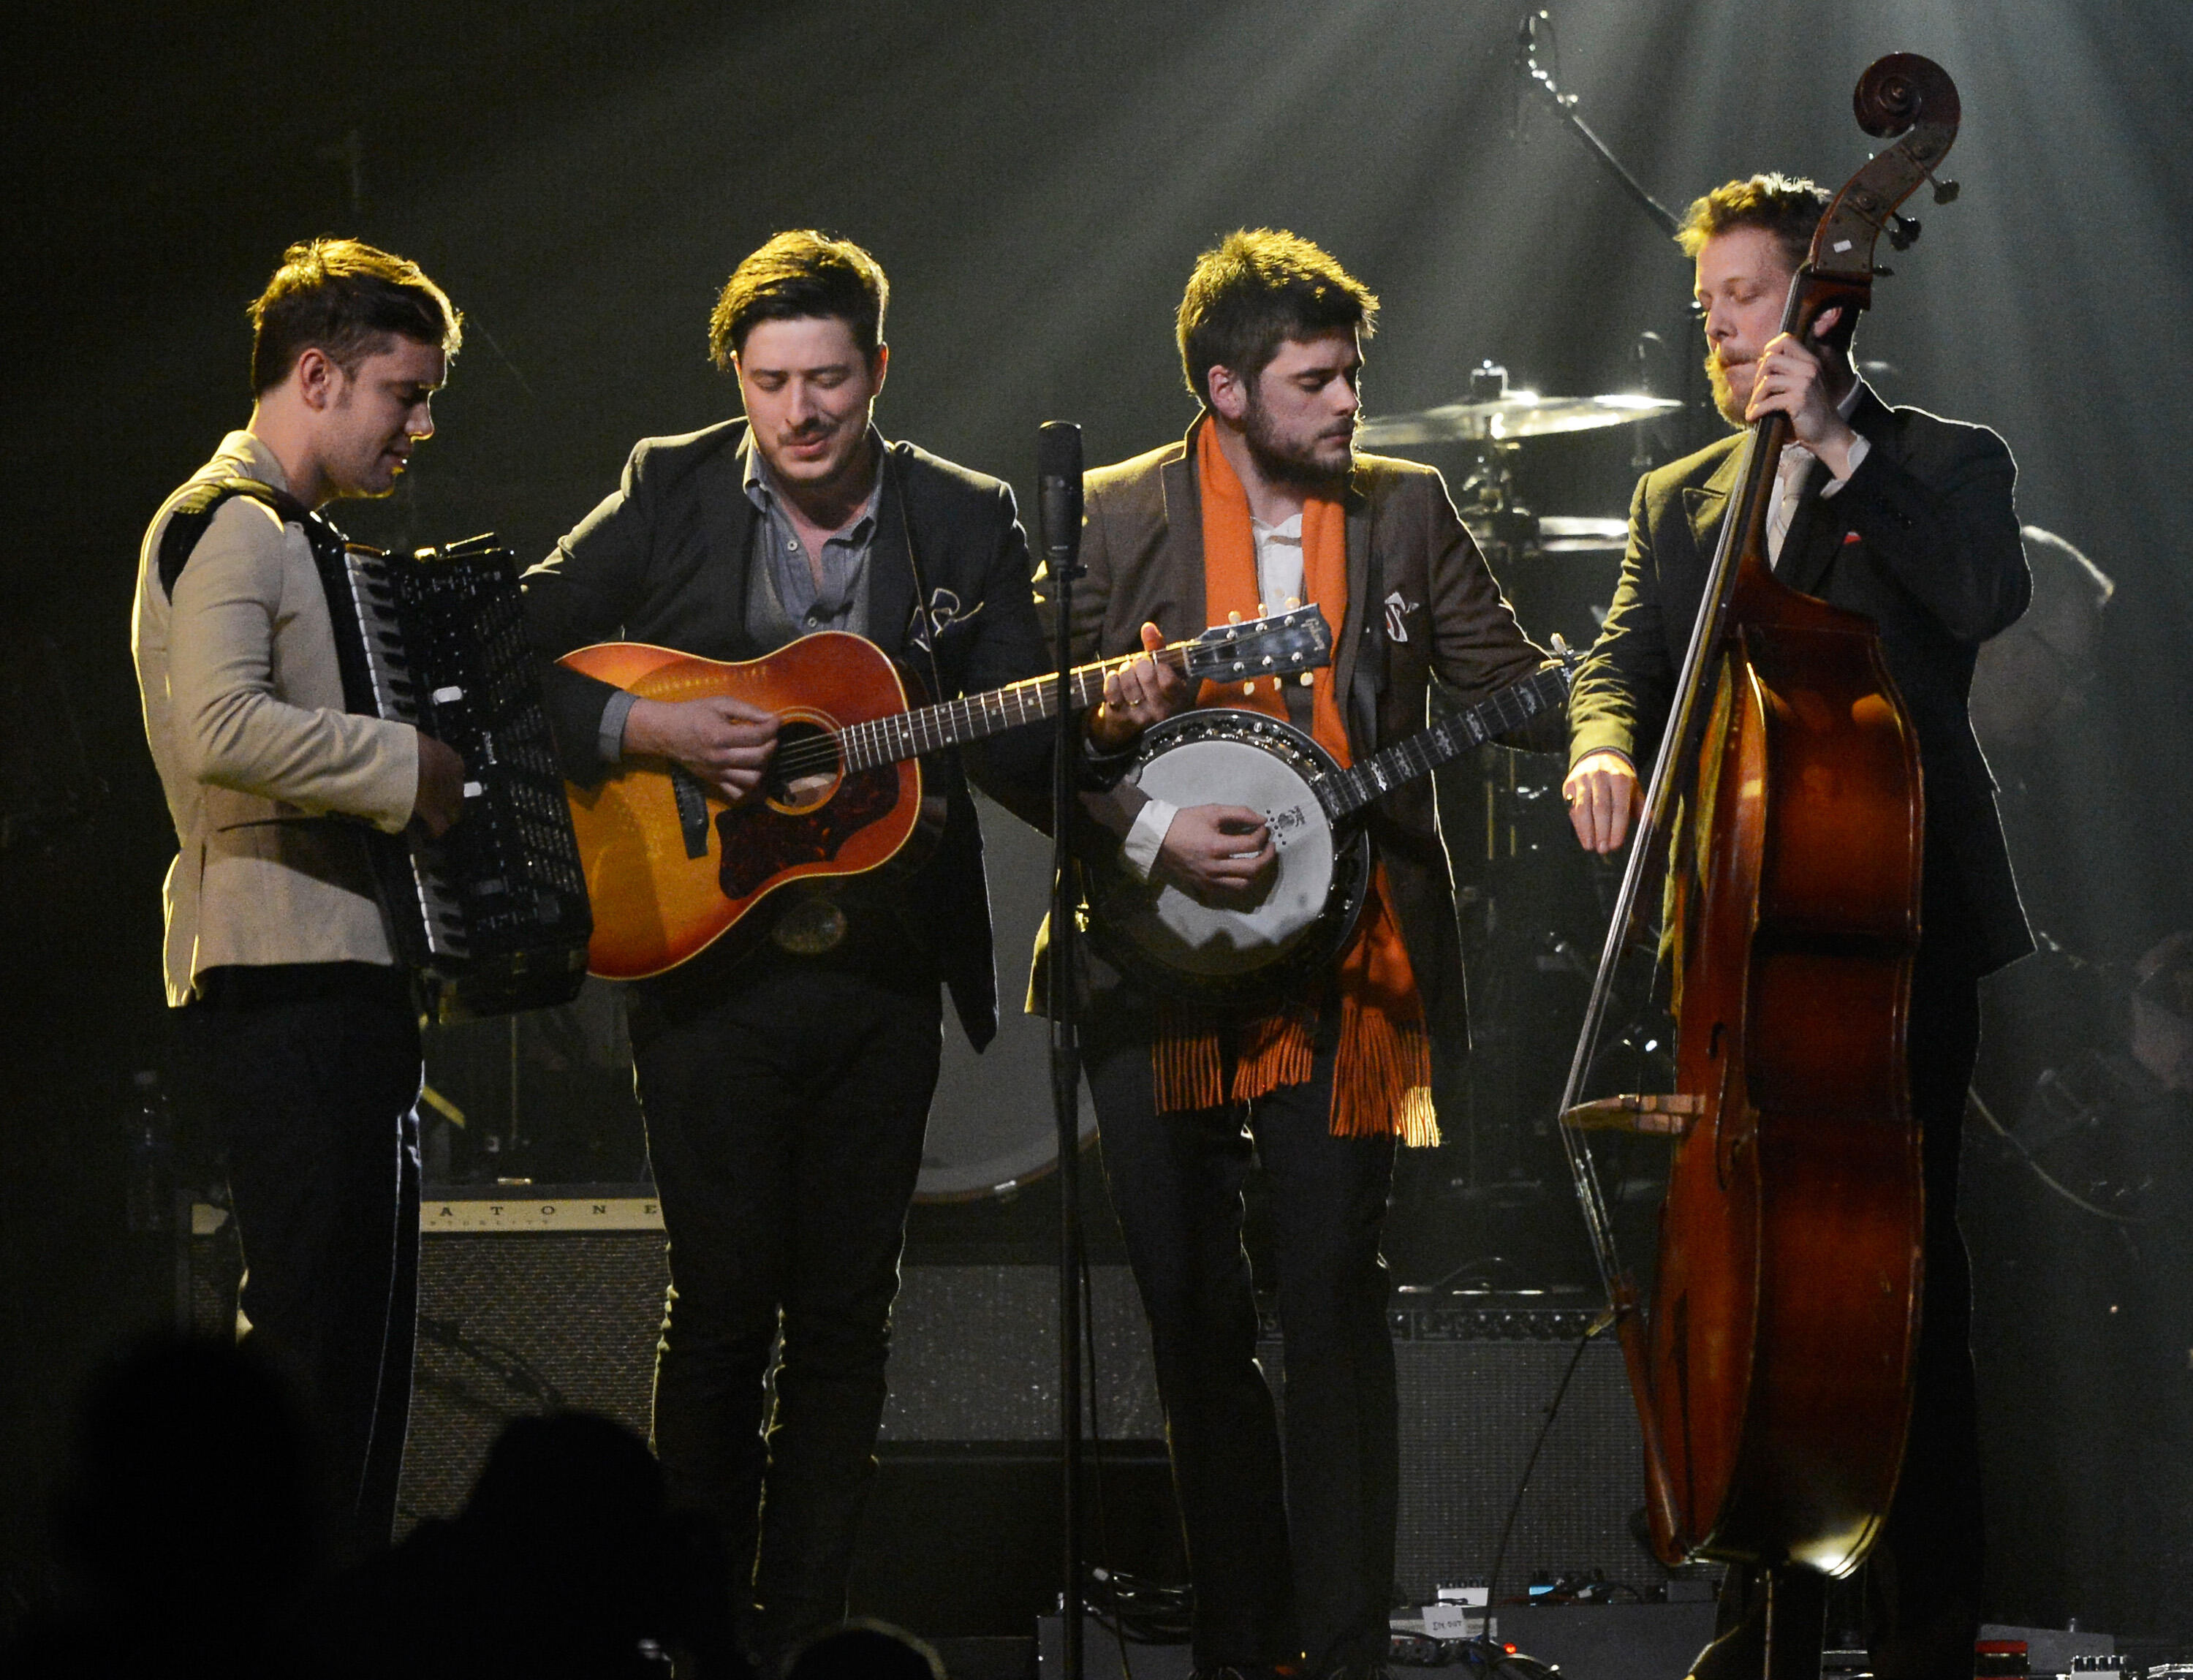 mumford and sons tour america